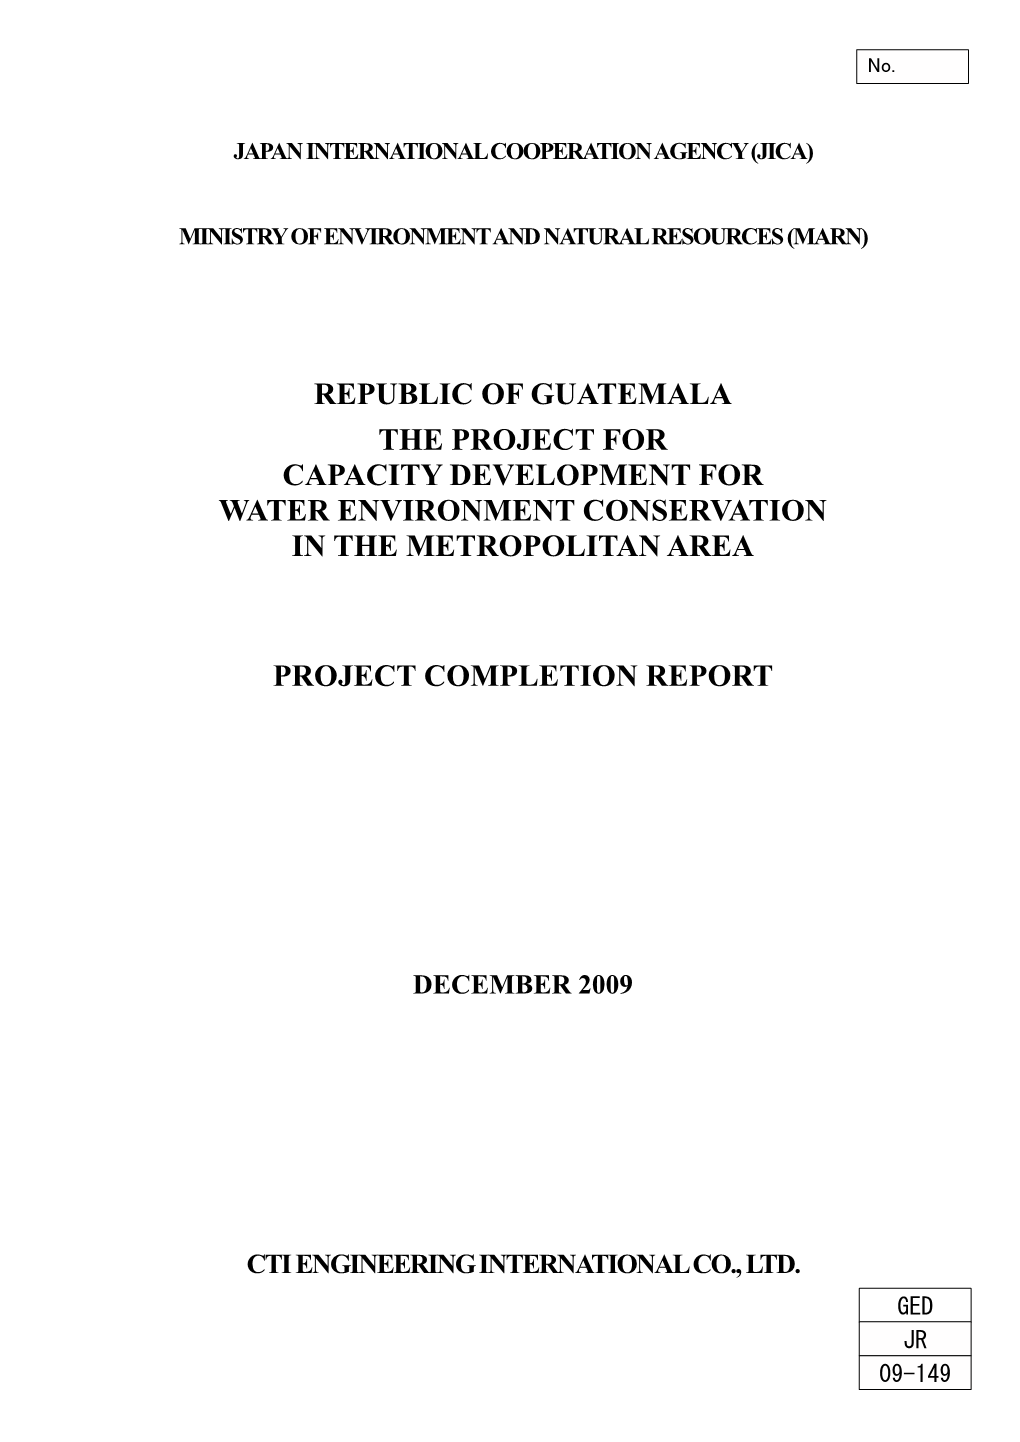 Republic of Guatemala the Project for Capacity Development for Water Environment Conservation in the Metropolitan Area Project C